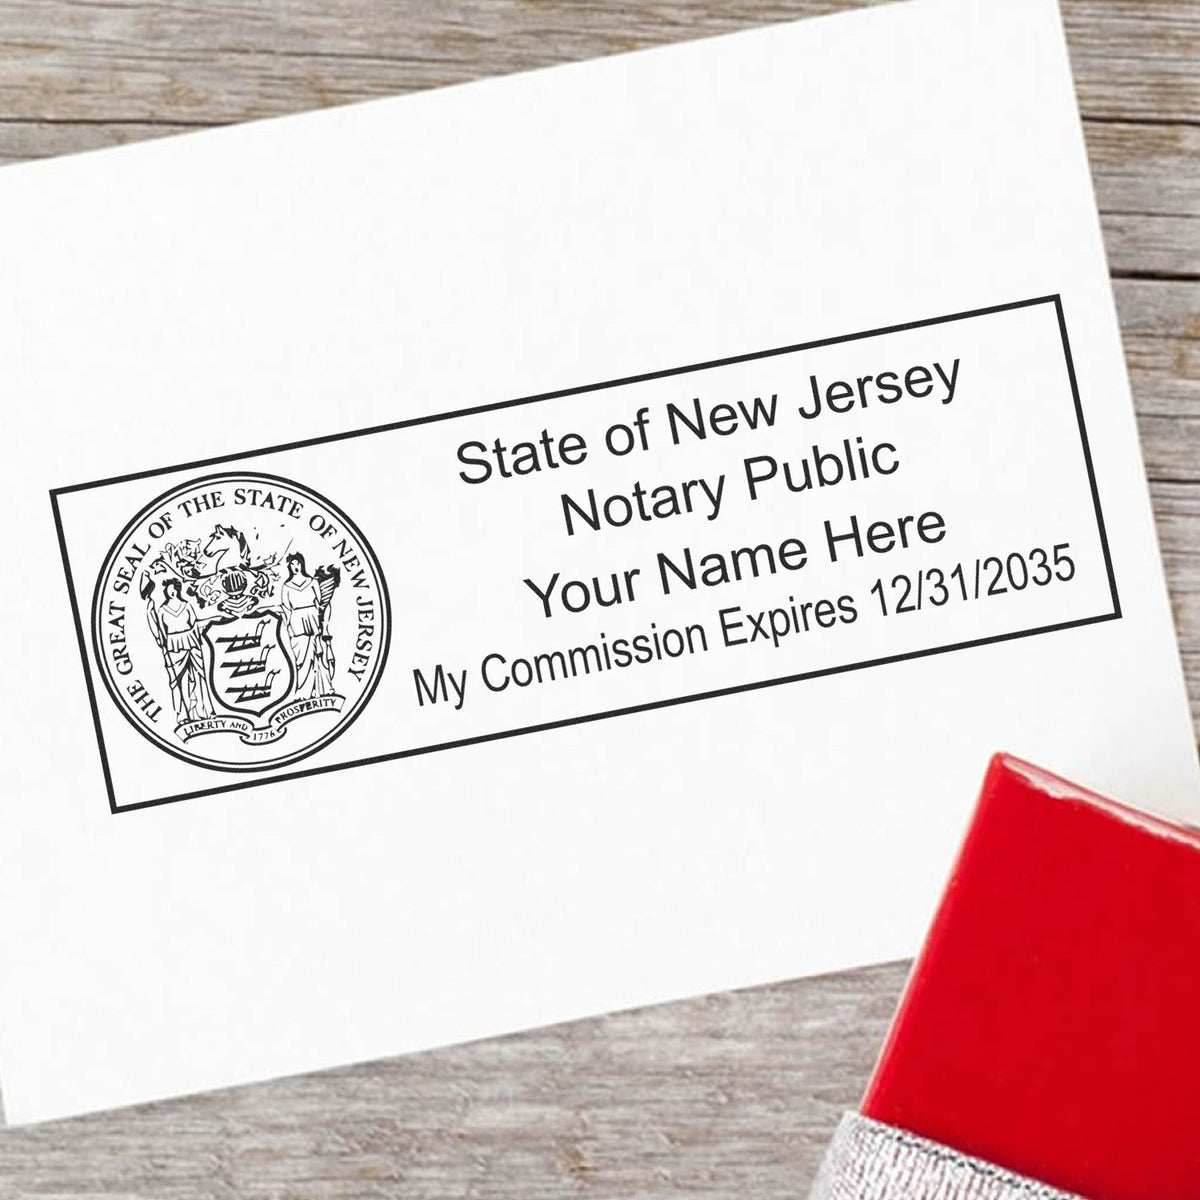 A lifestyle photo showing a stamped image of the Heavy-Duty New Jersey Rectangular Notary Stamp on a piece of paper